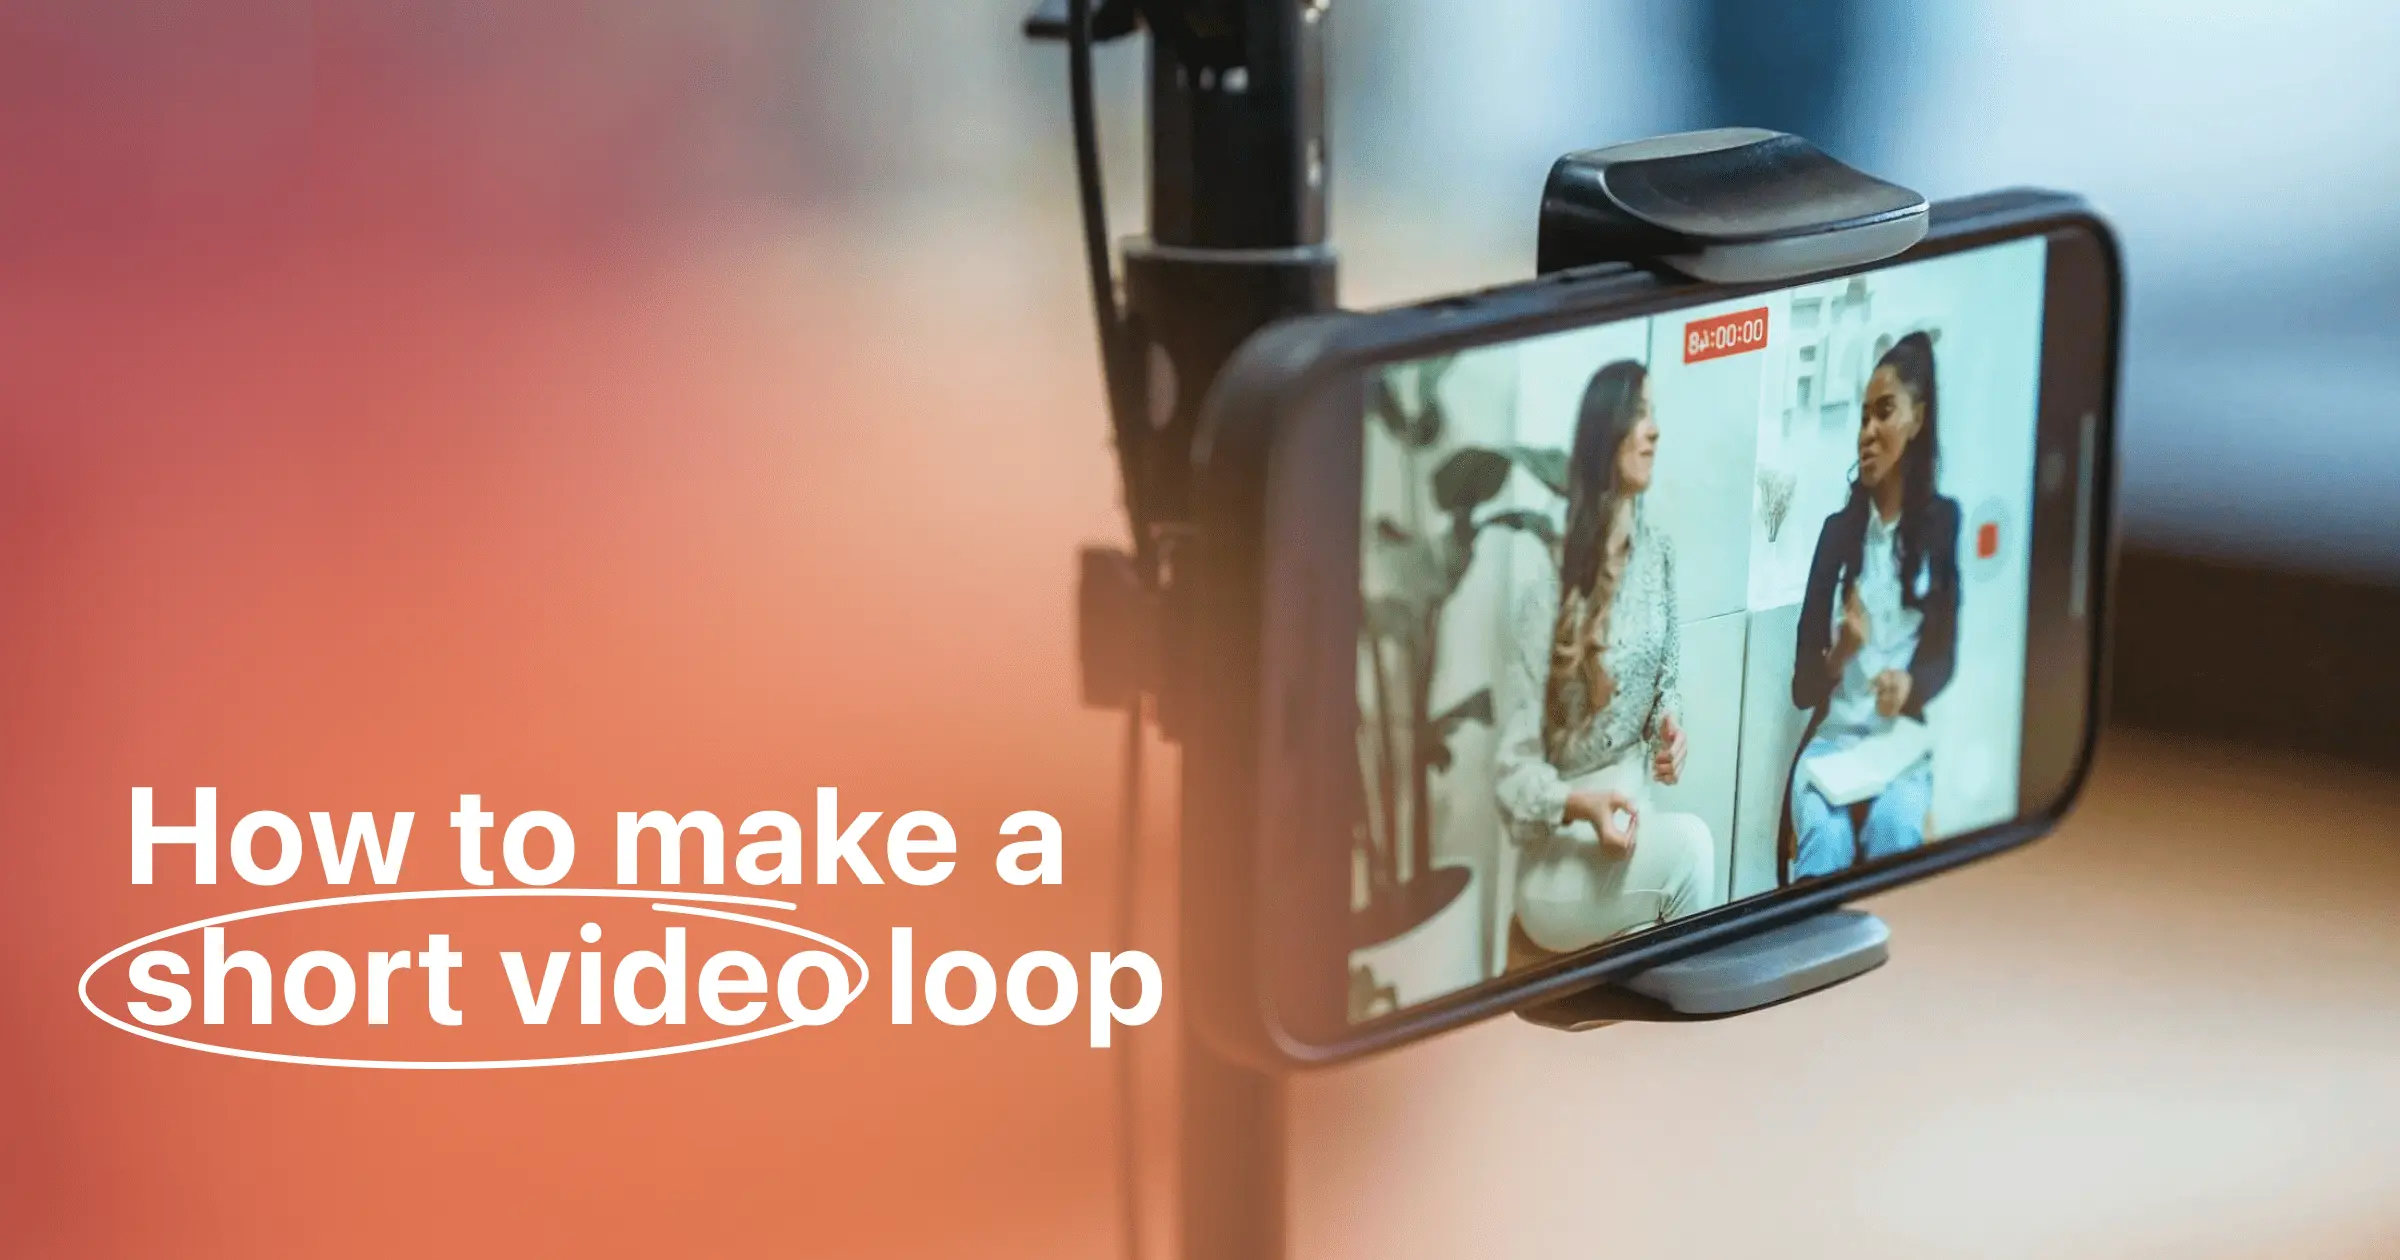 7 Easy Steps to Seamlessly Loop a Video on Your Phone